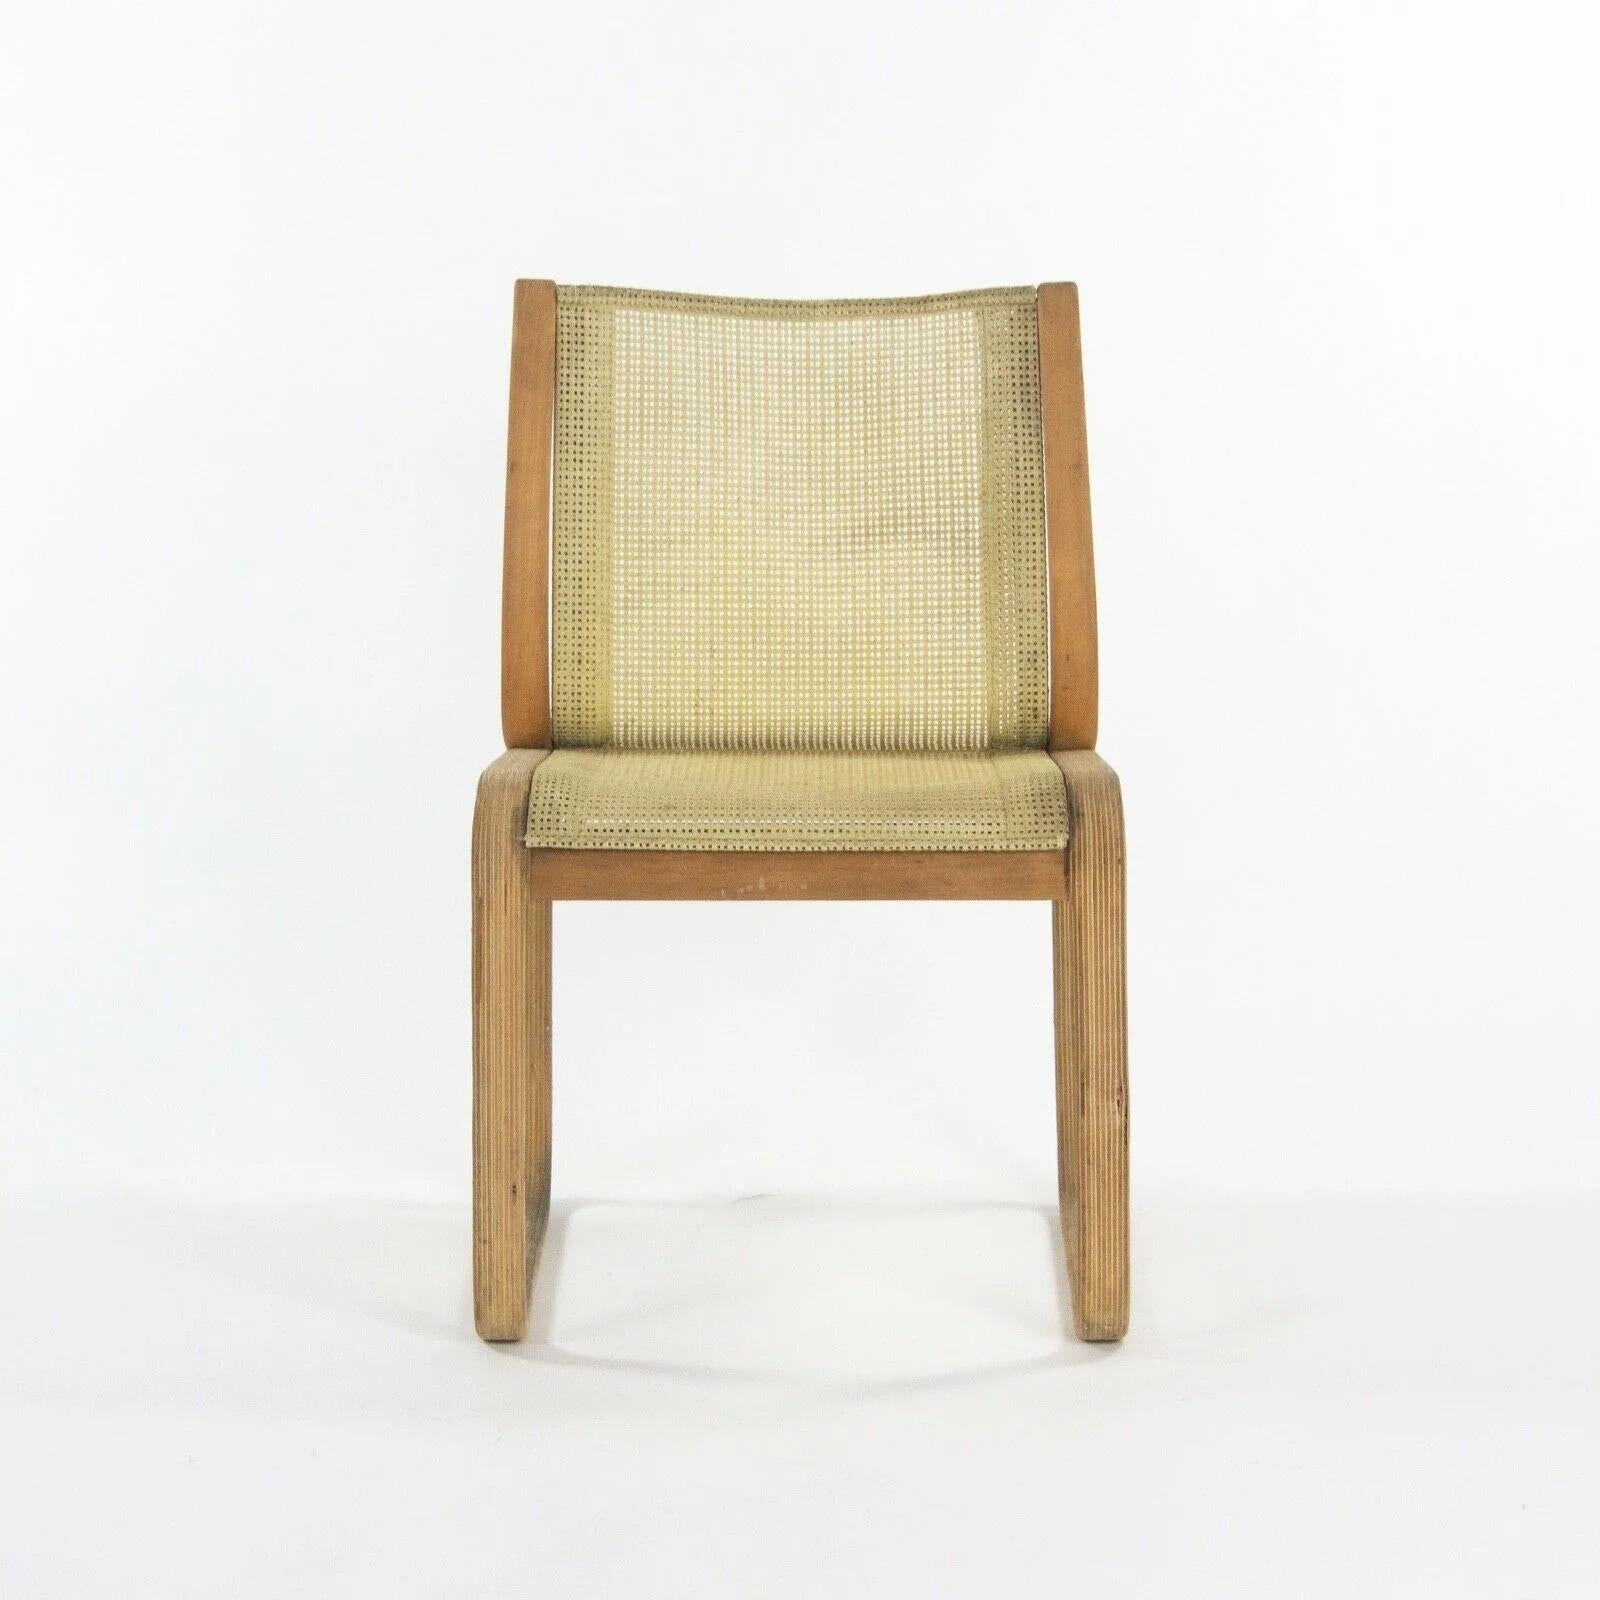 Listed for sale is a Richard Schultz Wooden Outdoor Collection dining chair prototype, dating to circa 1985. This is a marvelous and rare example. The frame is in very good shape with some light wear. The chair is constructed from bent wood with a